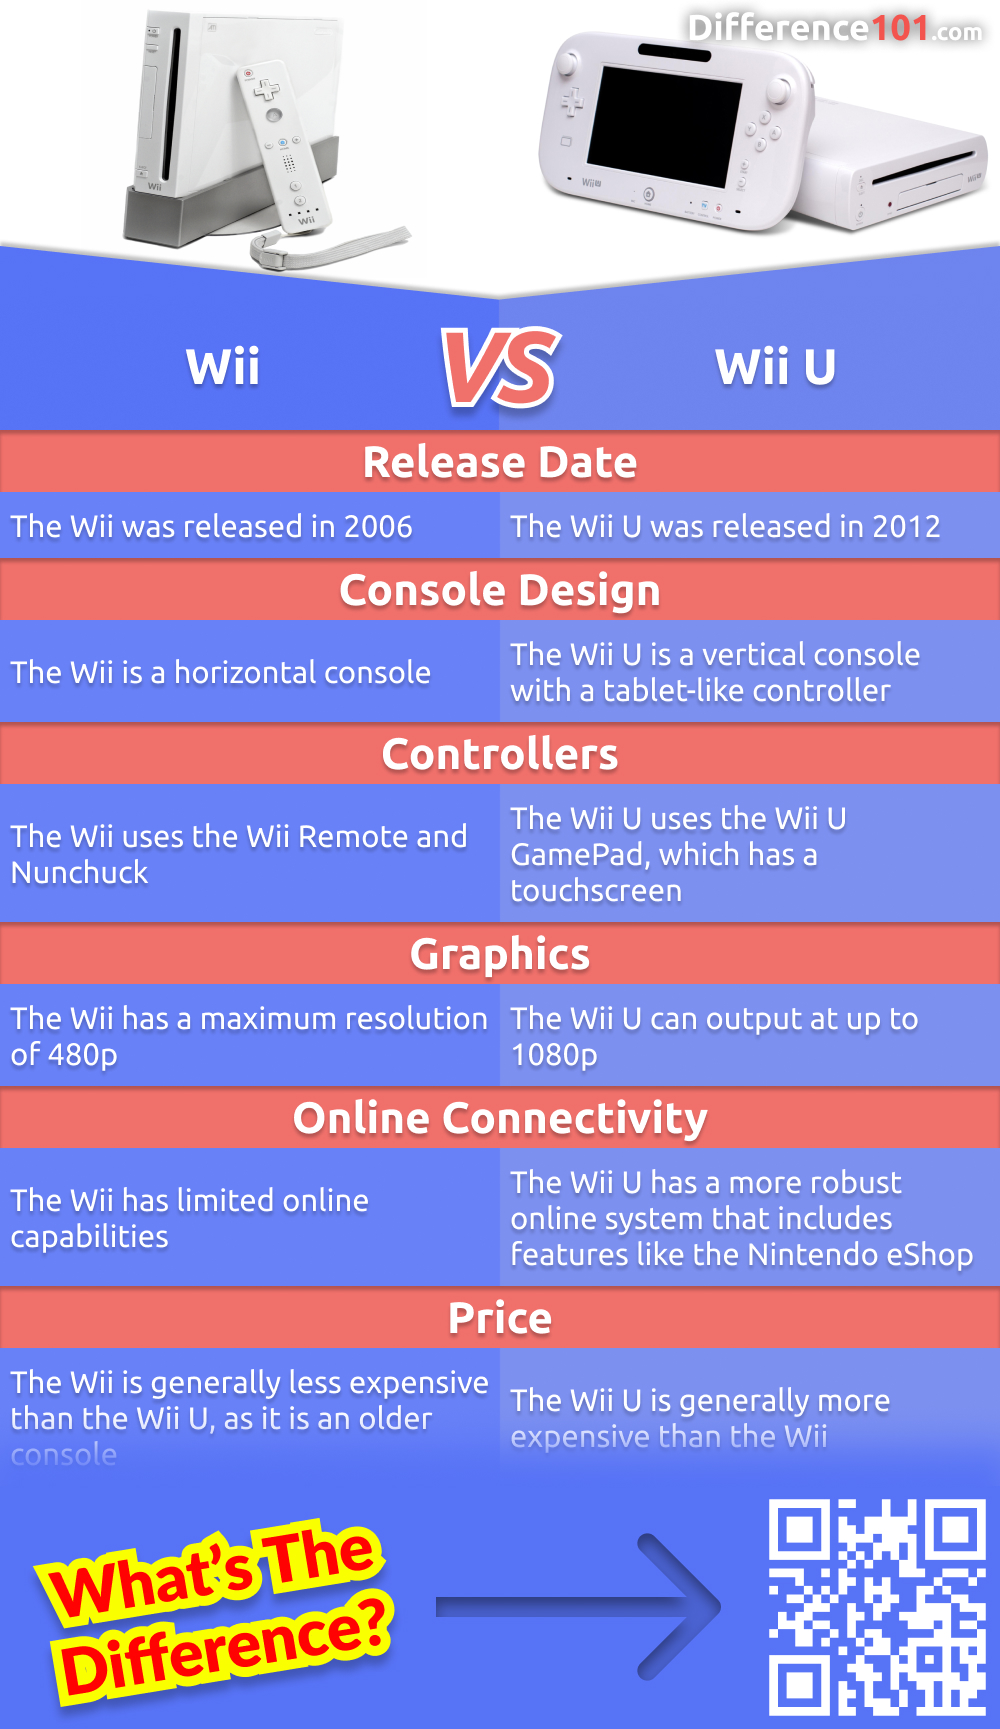 In this article, we will compare and contrast the Wii and Wii U gaming consoles. Let's look at the unique features and capabilities of each console, as well as their strengths and weaknesses. Read more here